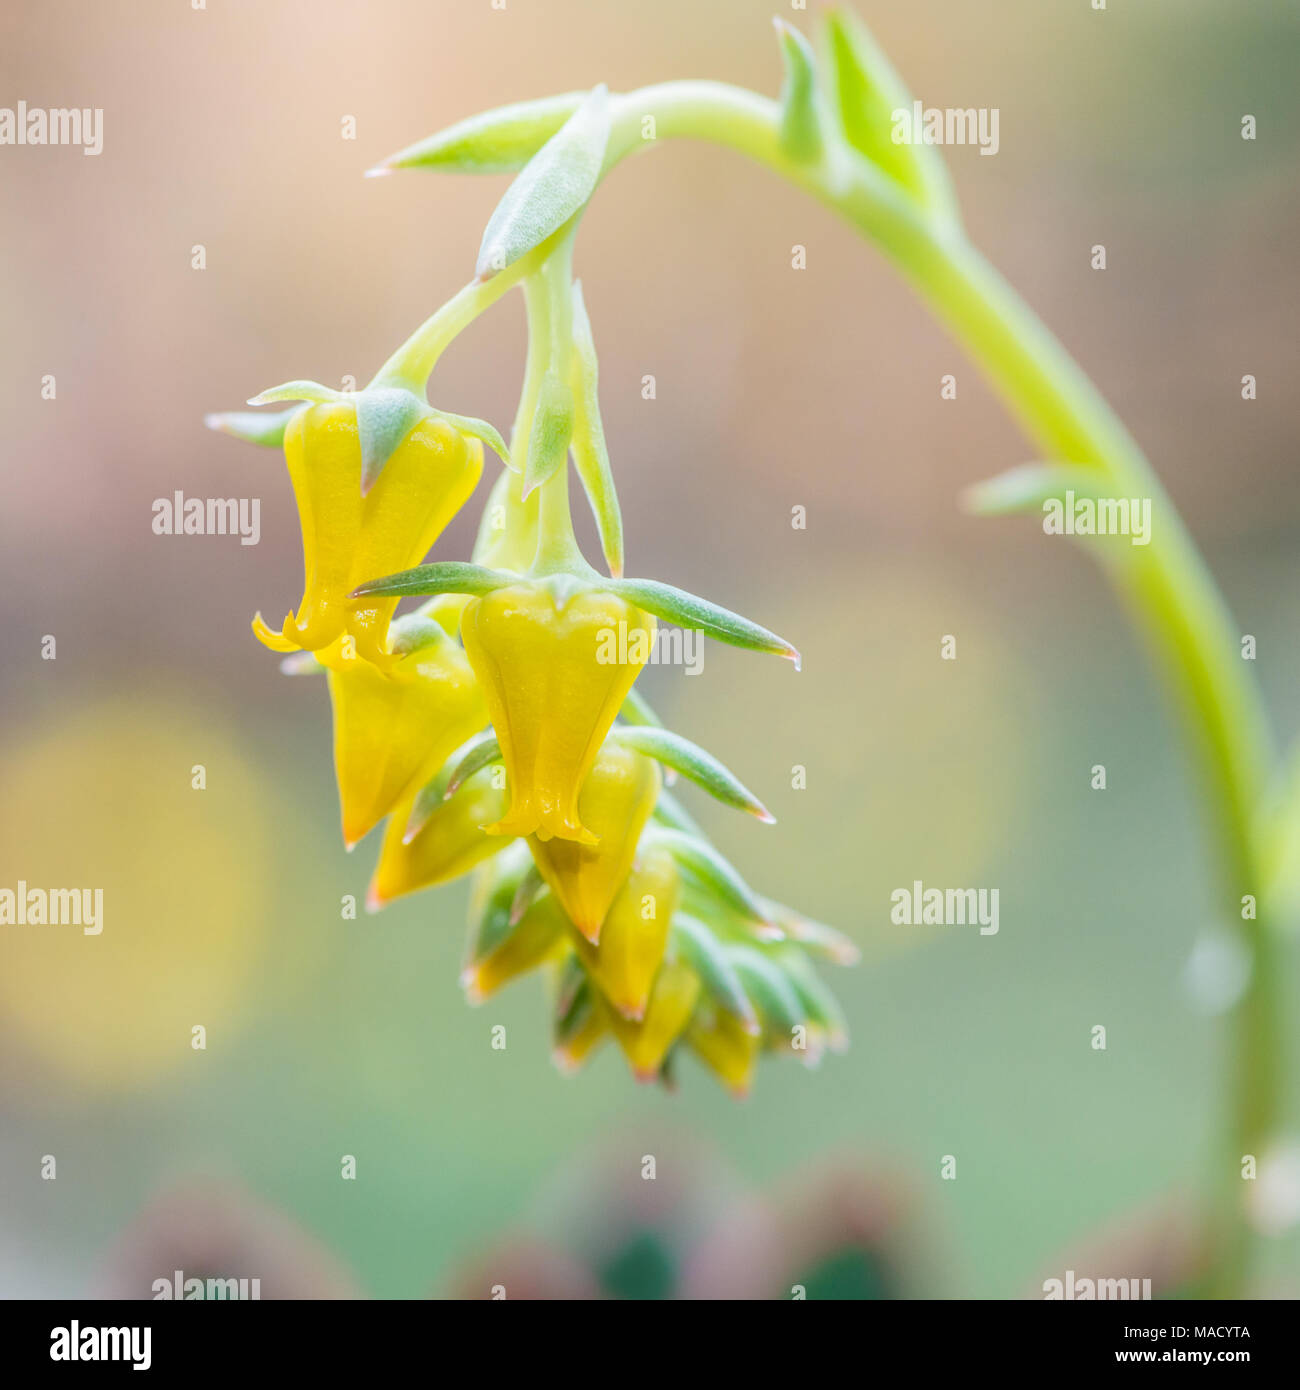 A macro shot of the yellow flower of an echeveria plant. Stock Photo